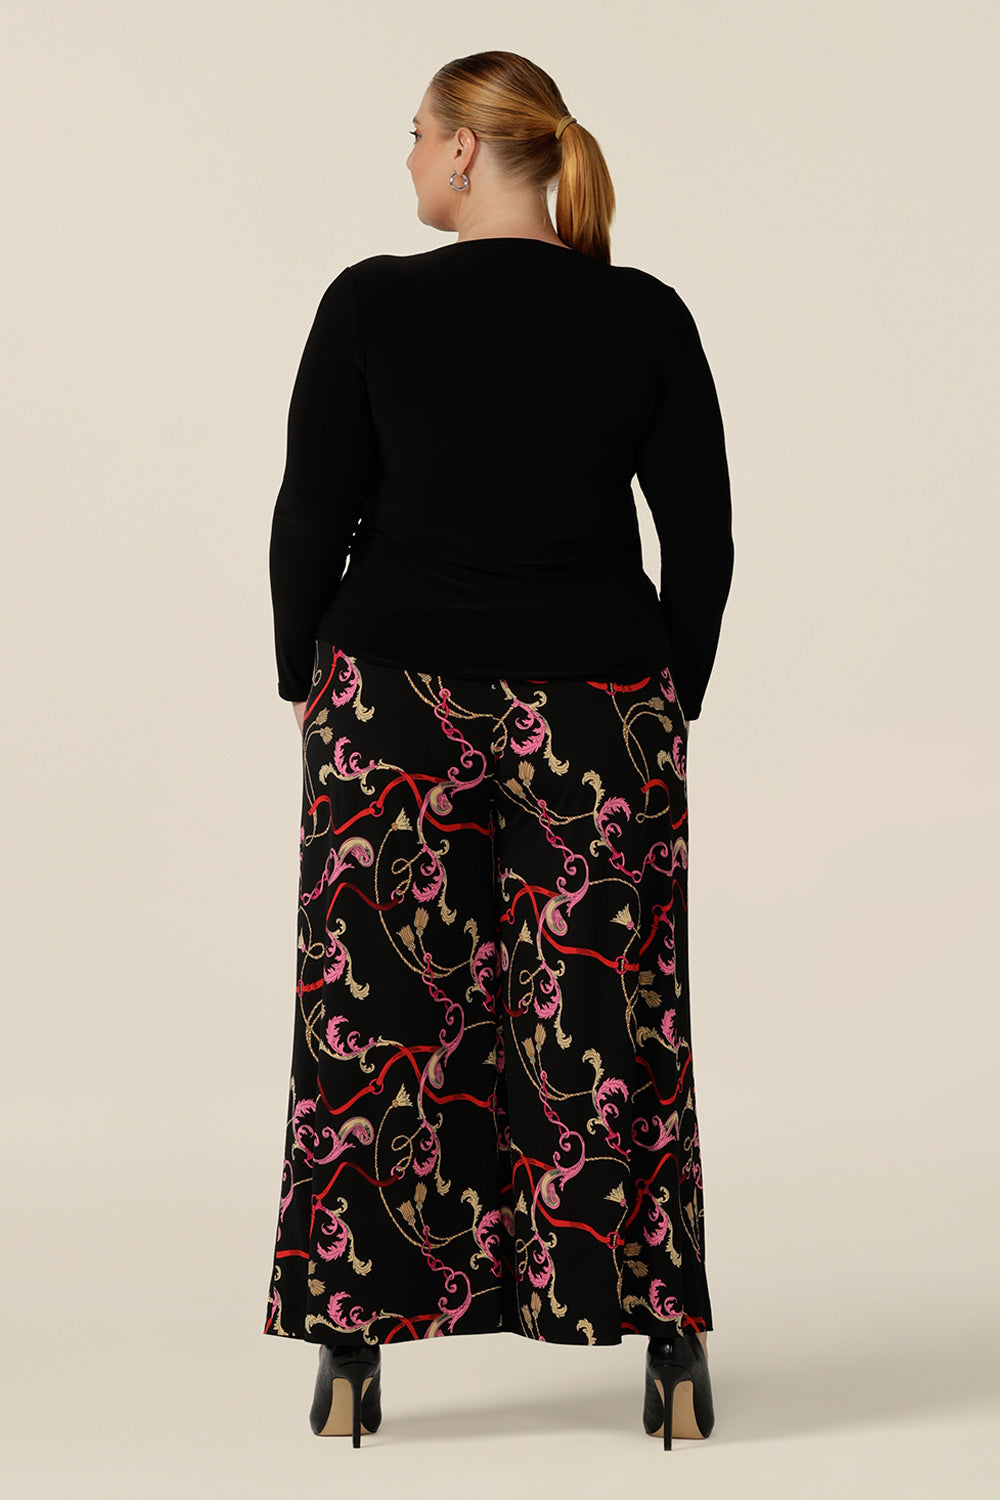 Back view of a plus size, size 18 woman wearing printed wide leg pants with pockets and a long sleeve black top. These pull-on, easy care pants are comfortable for your everyday workwear capsule wardrobe. Shop these Australian-made wide leg trousers online in sizes 8 to 24, petite to plus sizes.